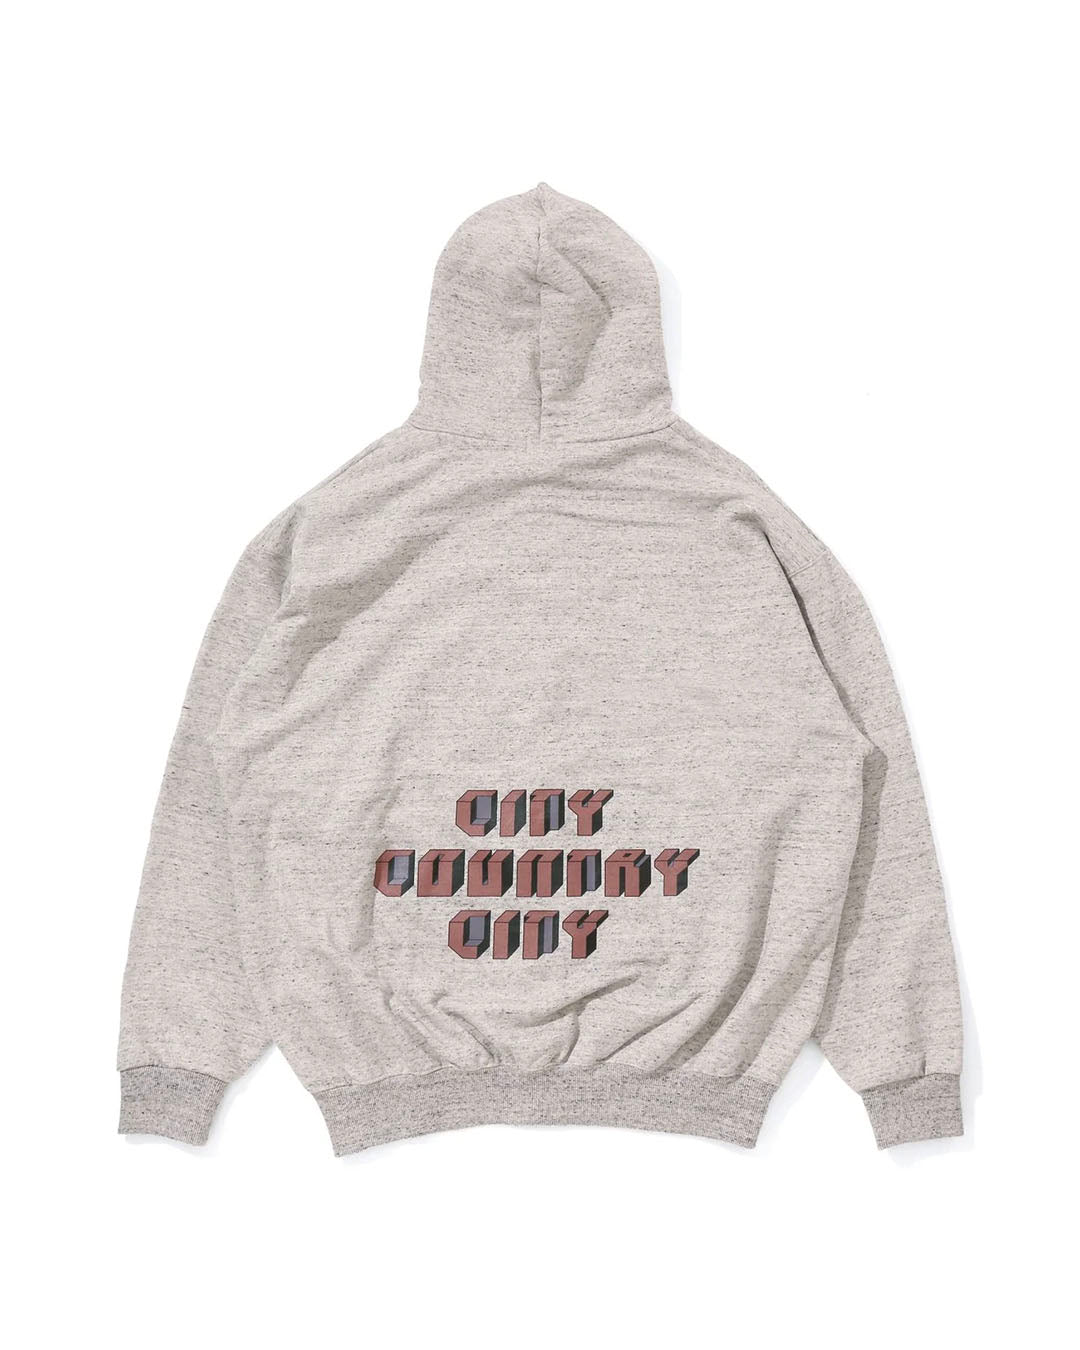 【CITY COUNTRY CITY】EMBROIDERED LOGO ZIP UP COTTON HOODIE - AH GREY